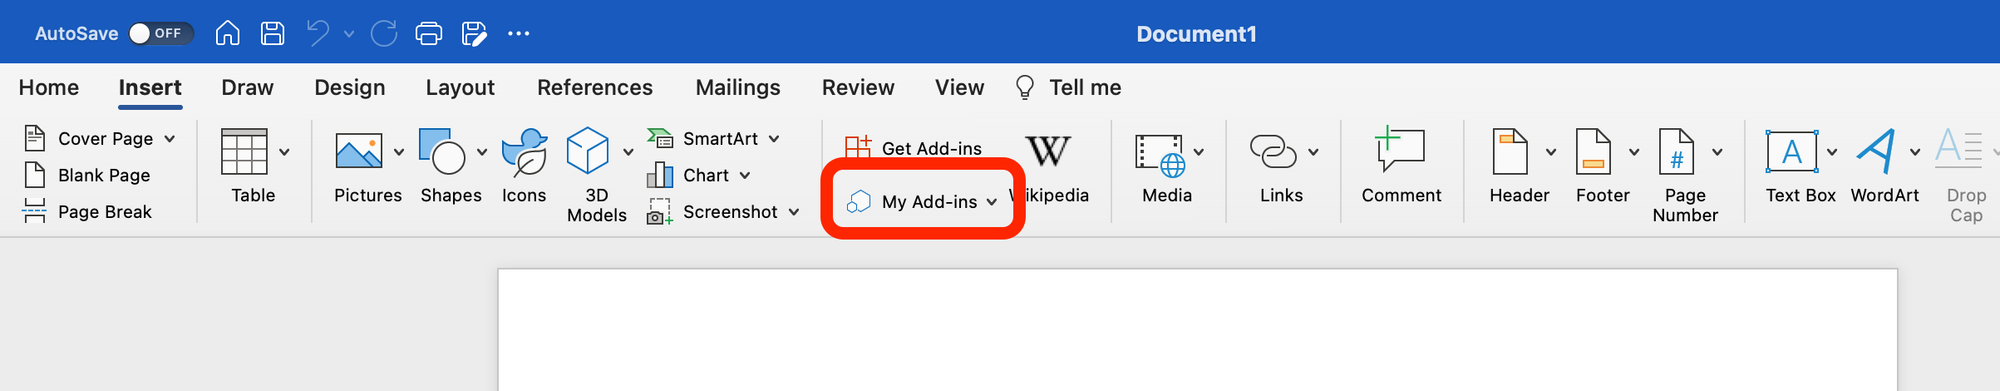 Finding the My Add-ins button in Word